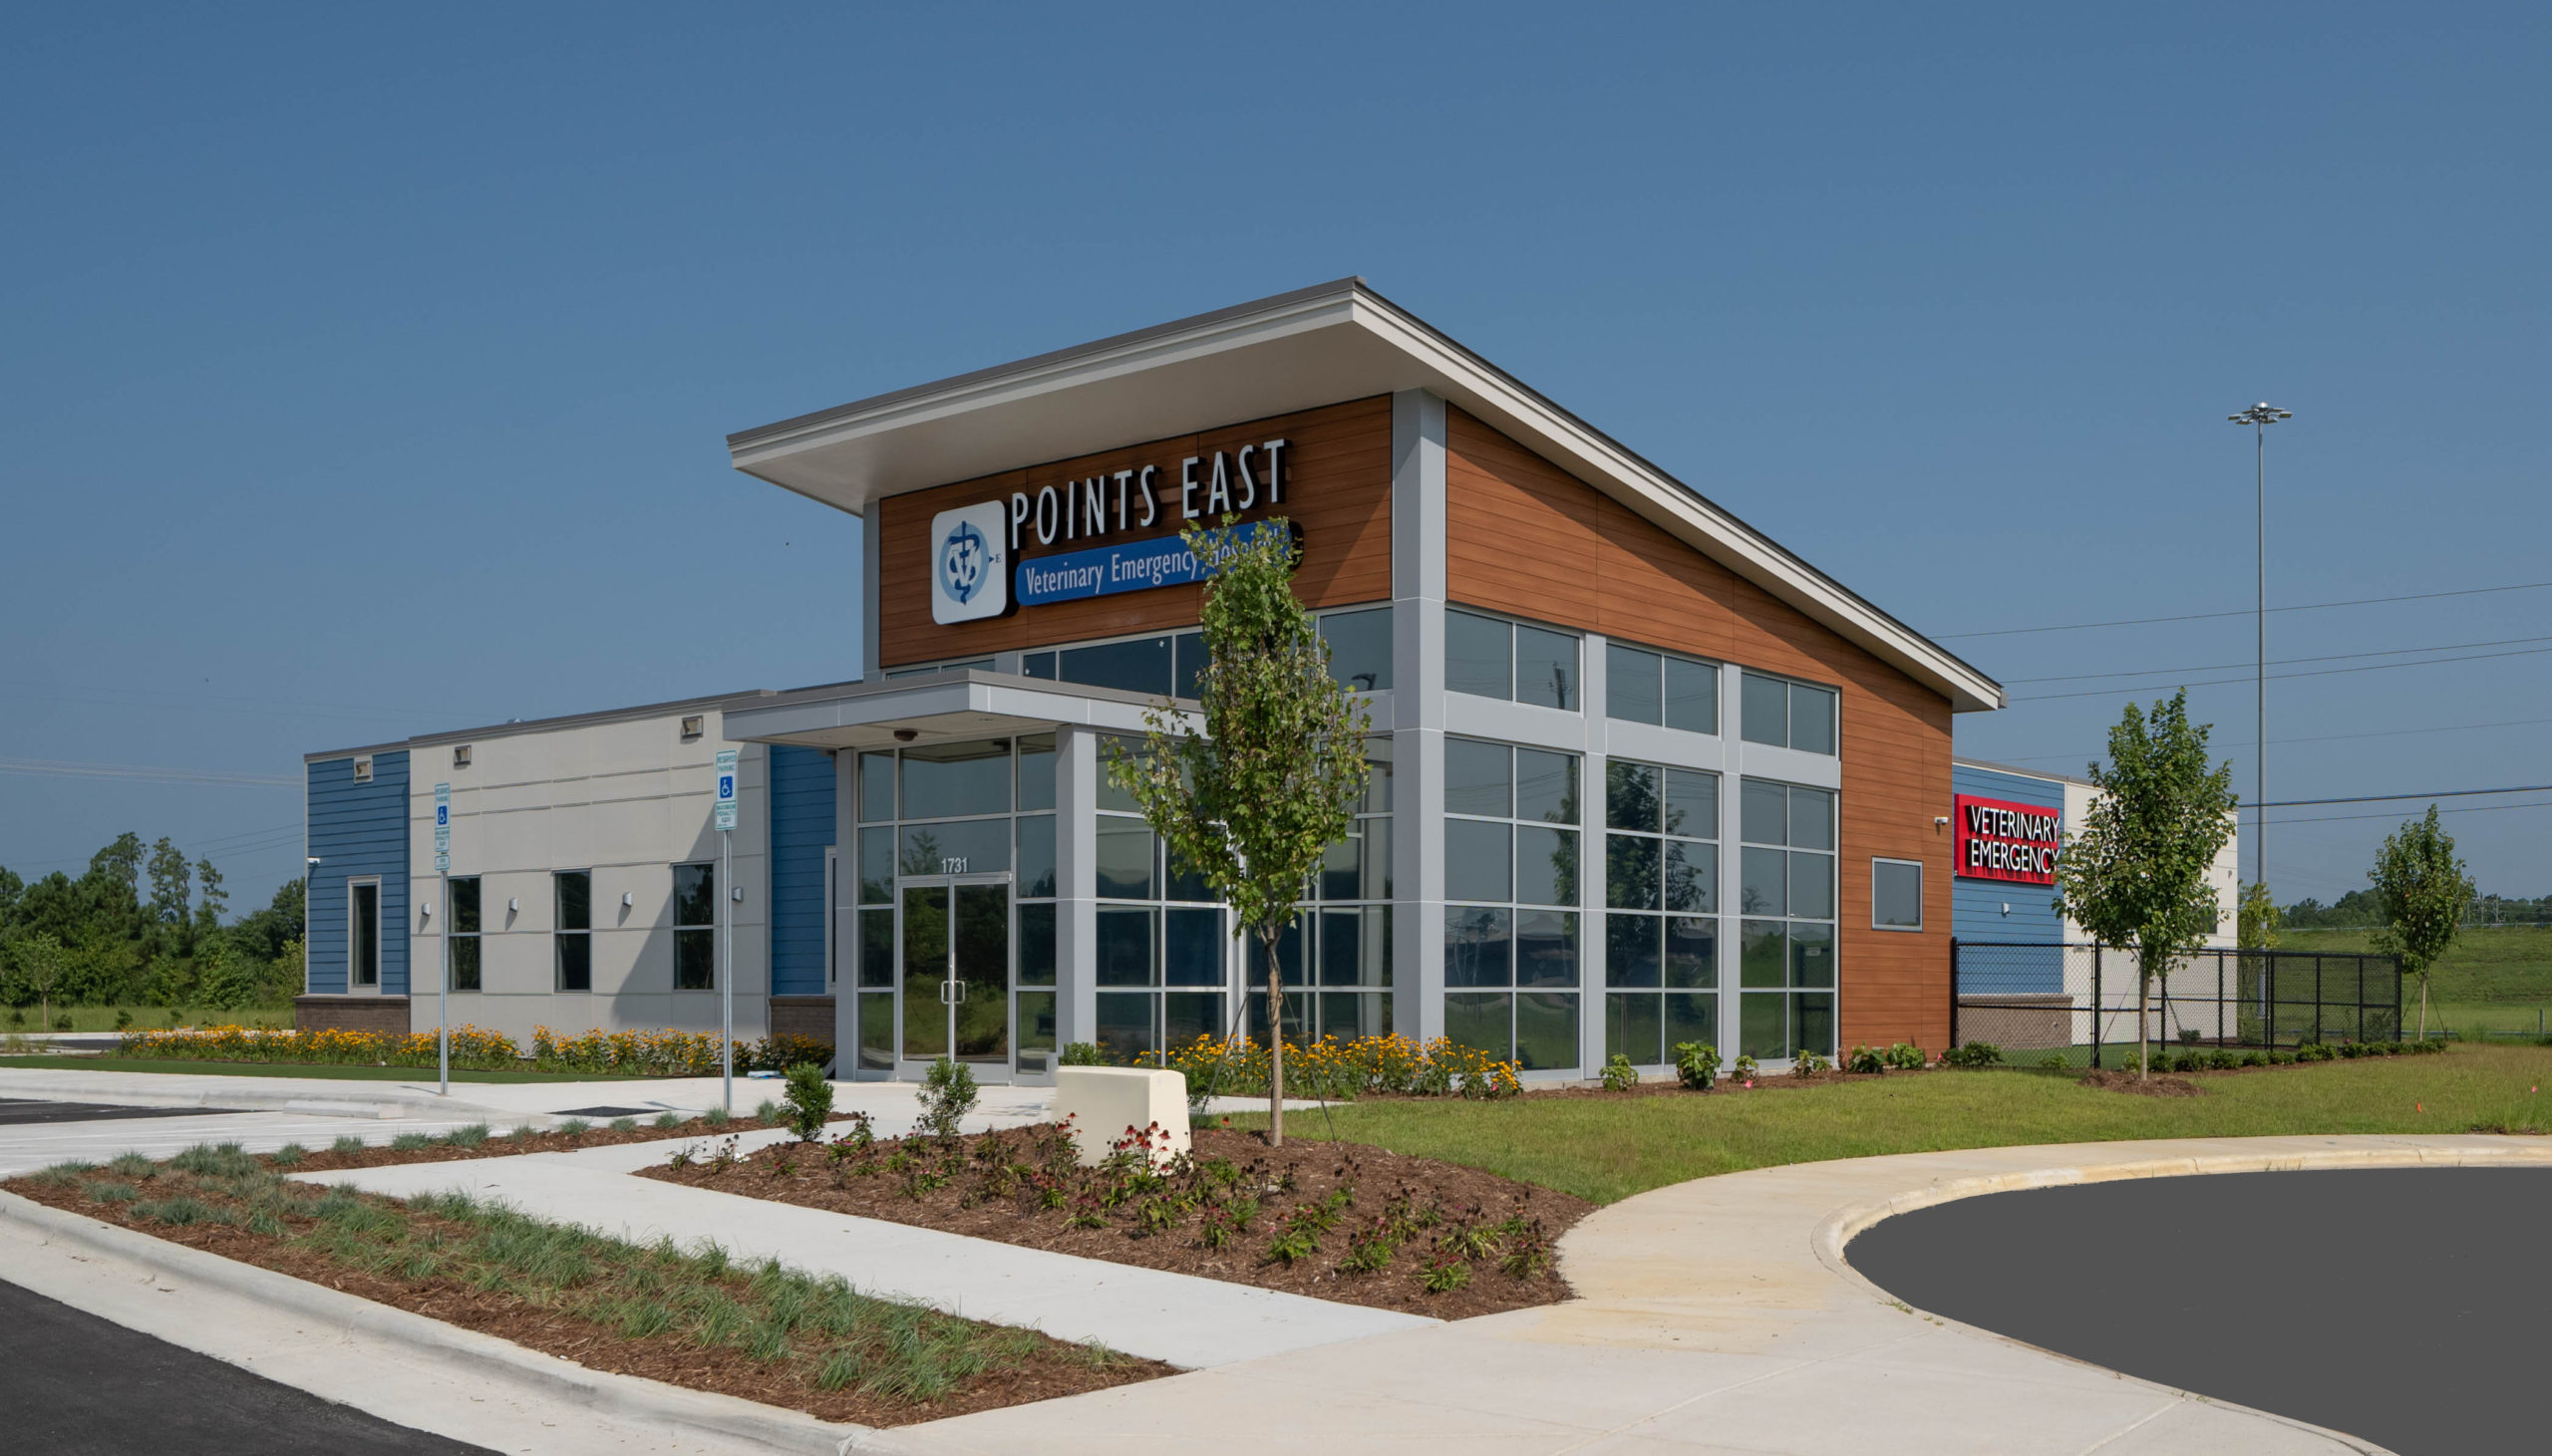 Vets Pets Moves into New Free Standing Veterinary Emergency Facility in  Fayetteville